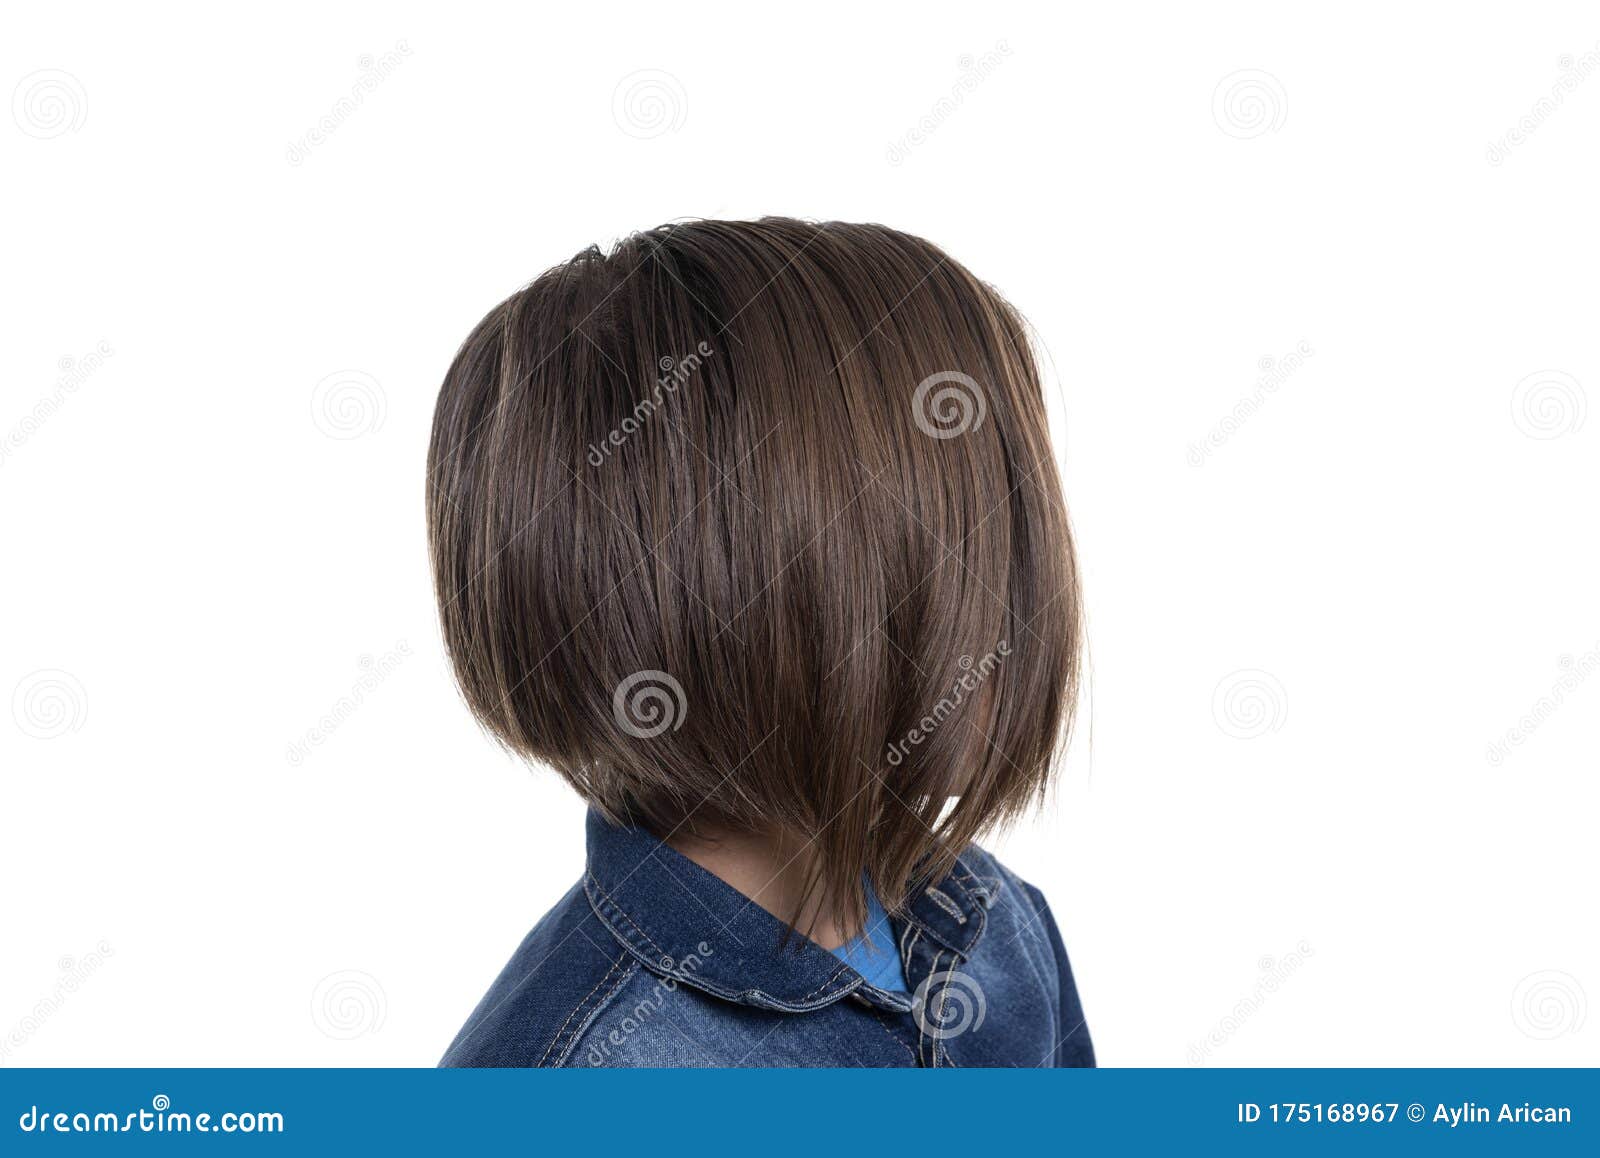 Little Boy with Long Hair on White Background Stock Image - Image of color,  hairstyle: 175168967